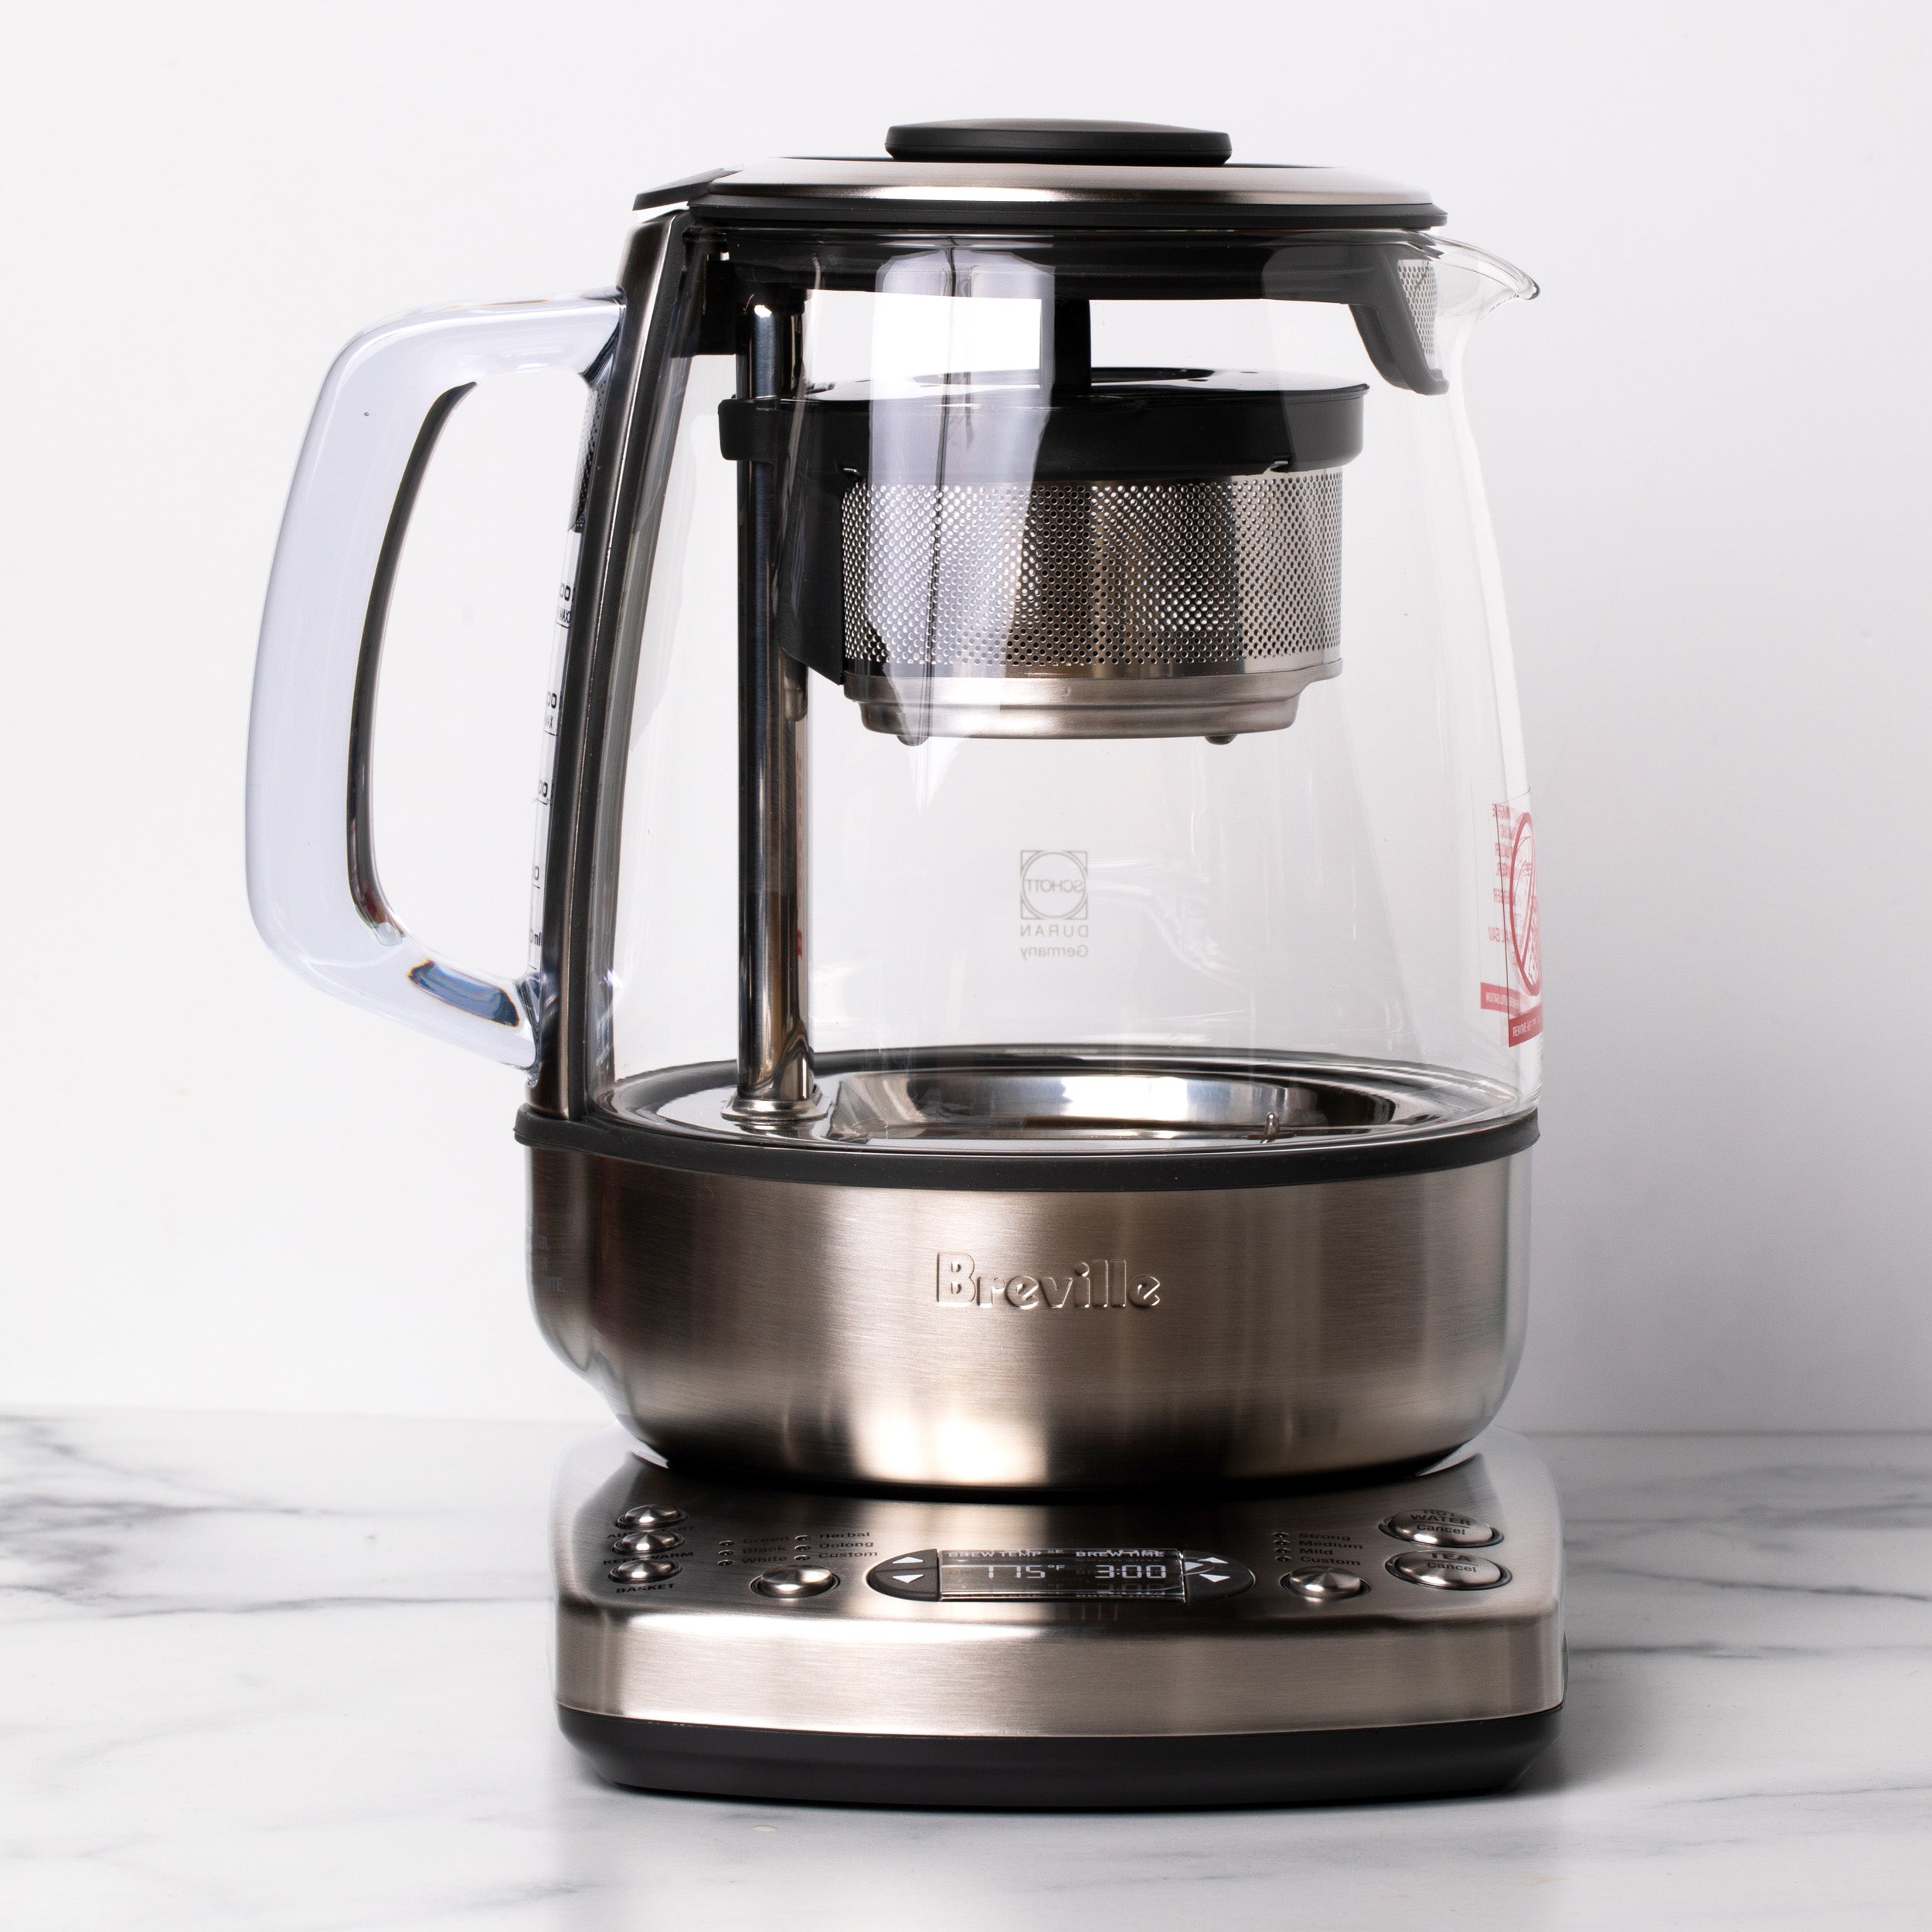 Clear electric kettle with silver handle and silver electric base.